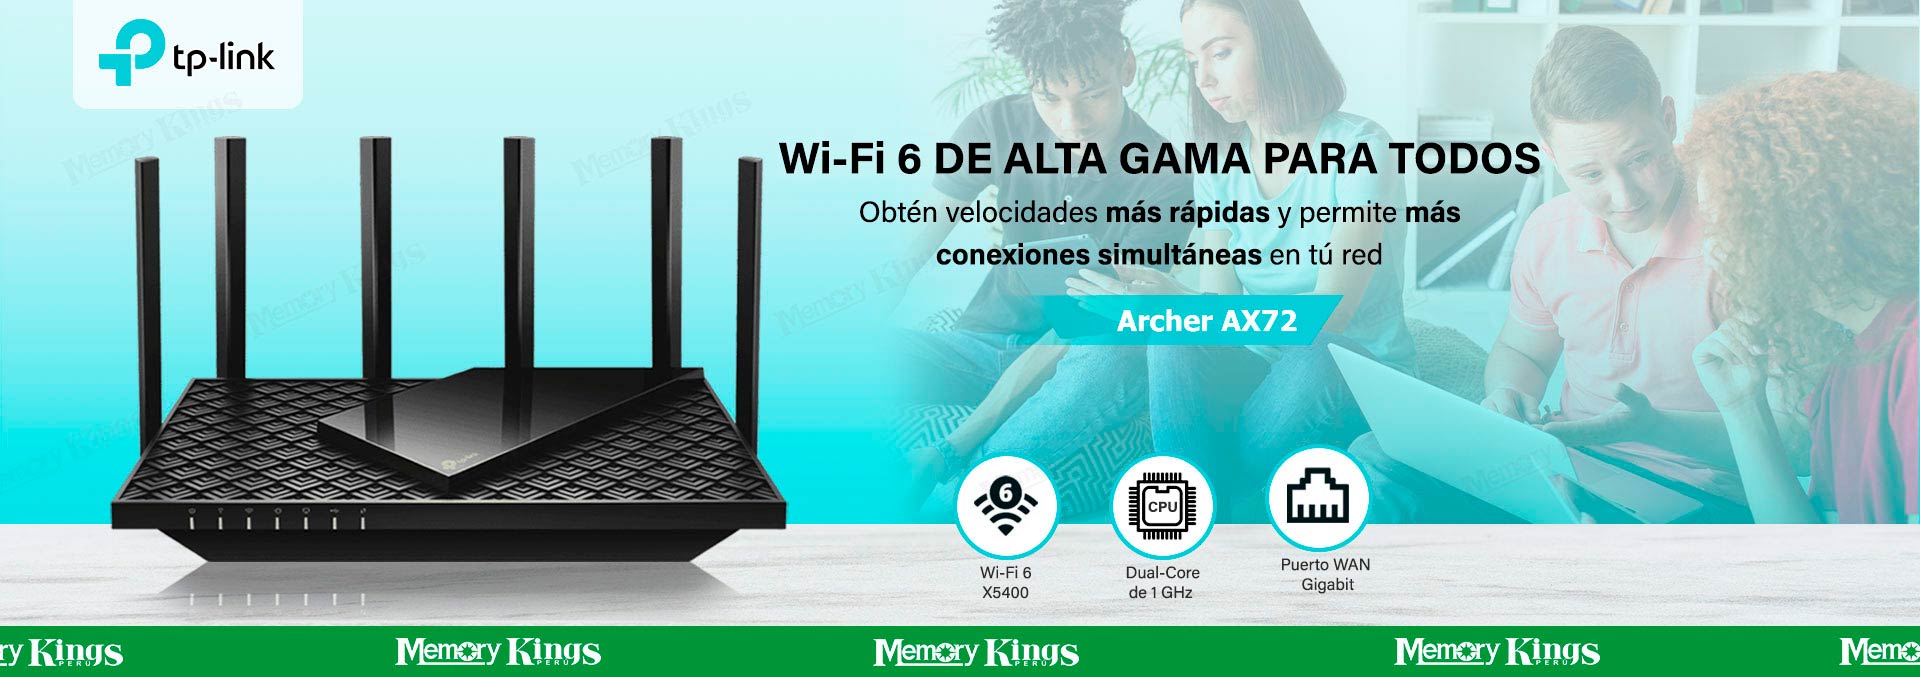 031047 - ROUTER TP-LINK Archer AX72 AX5400 2BAND 6antenas